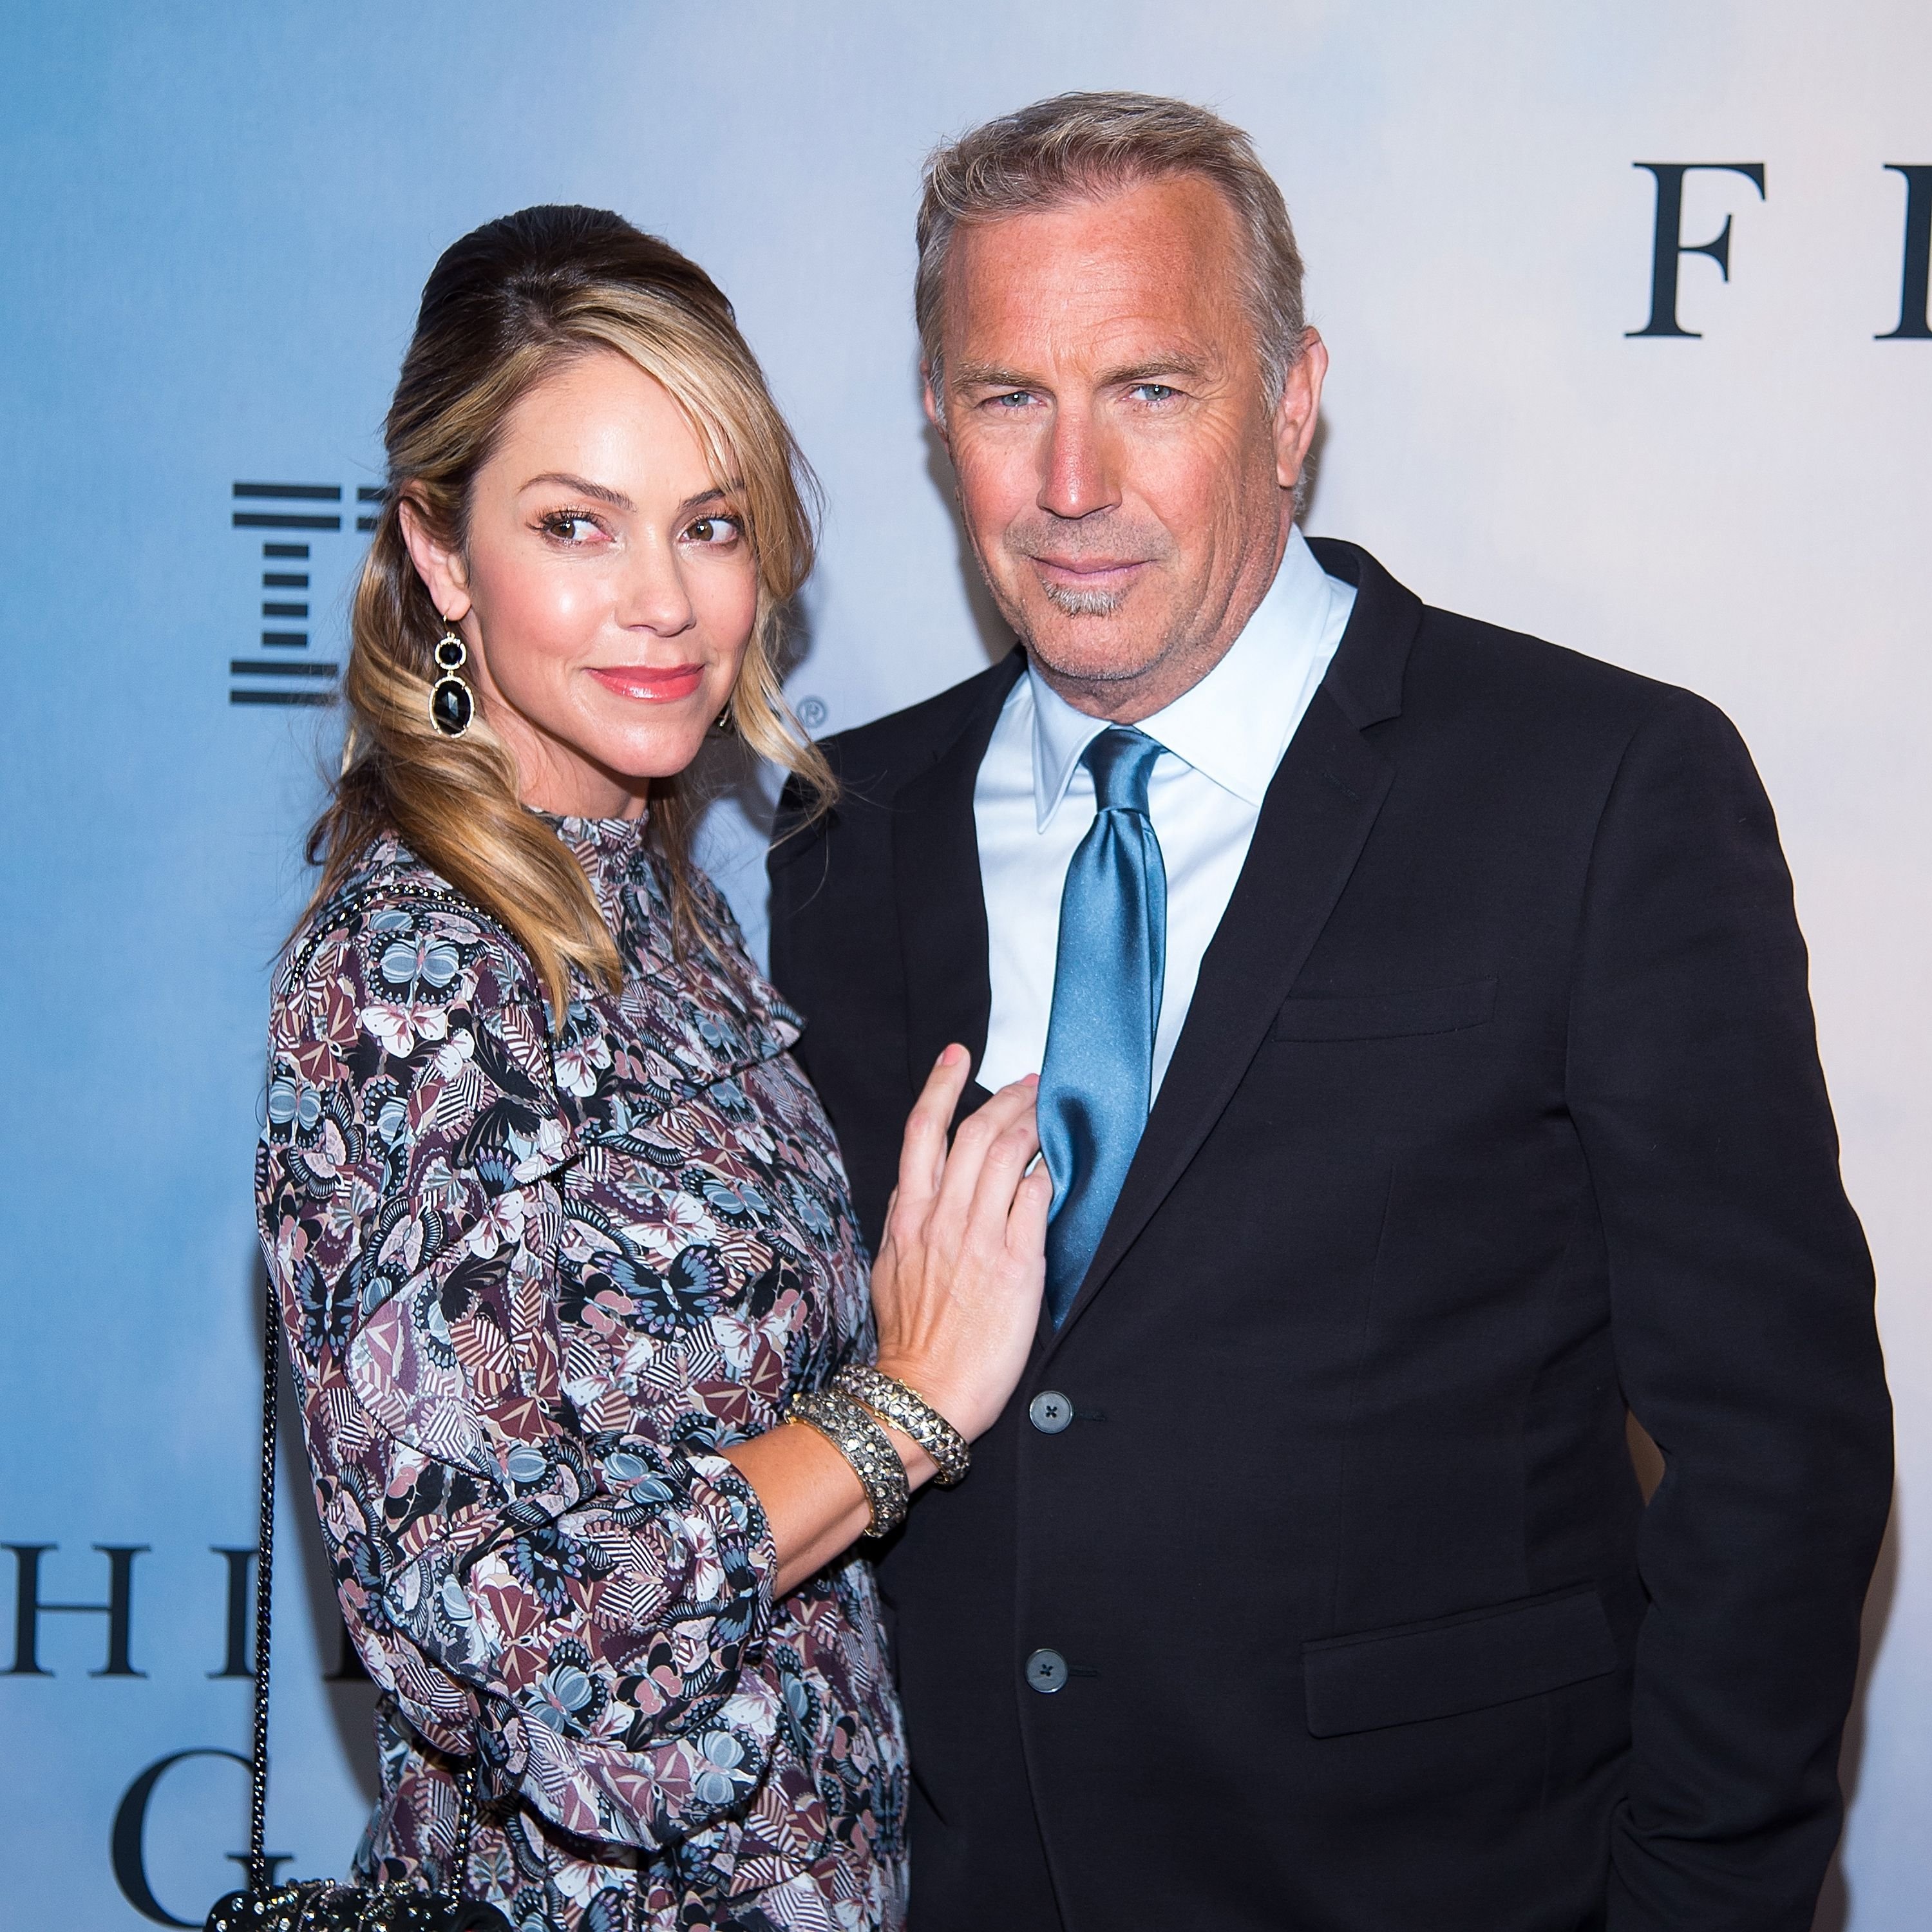 Christine Baumgartner and Kevin Costner during the "Hidden Figures" New York special screening on December 10, 2016 in New York City. | Source: Getty Images